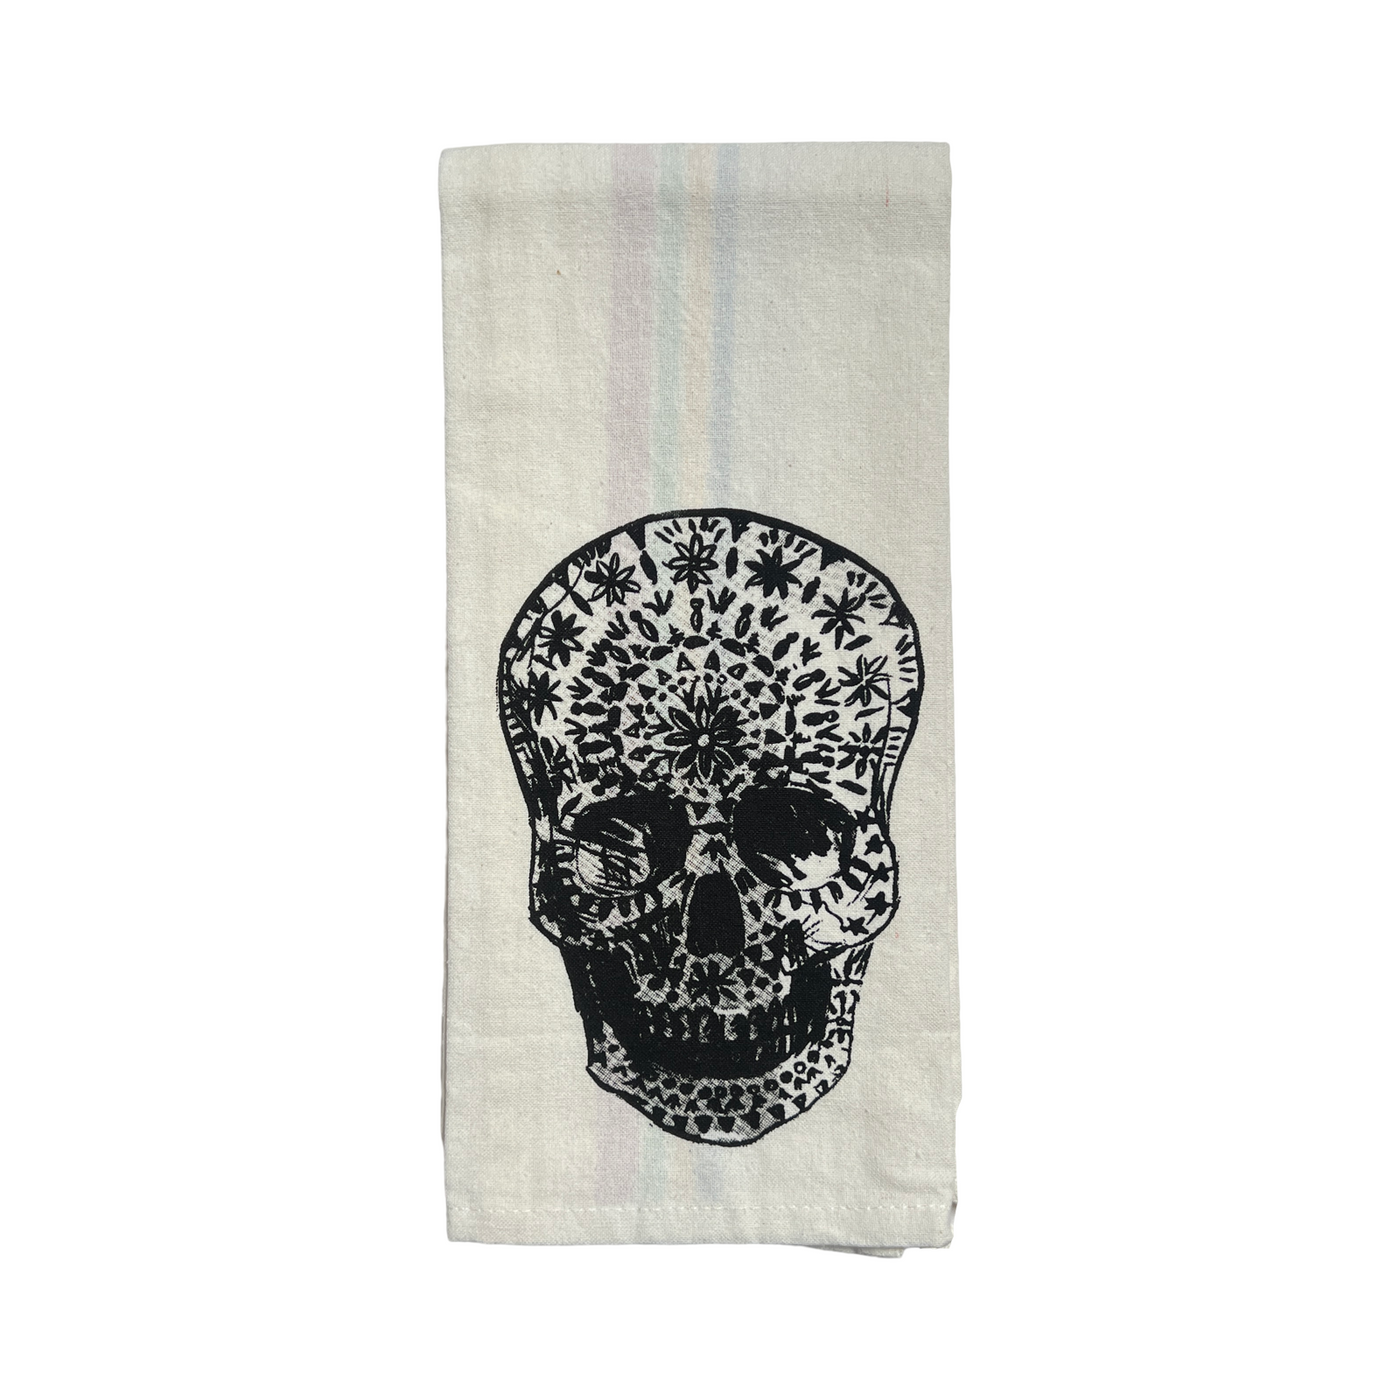 natural flour sack towel folded in quarters with a black and white image of a decorated human skull.